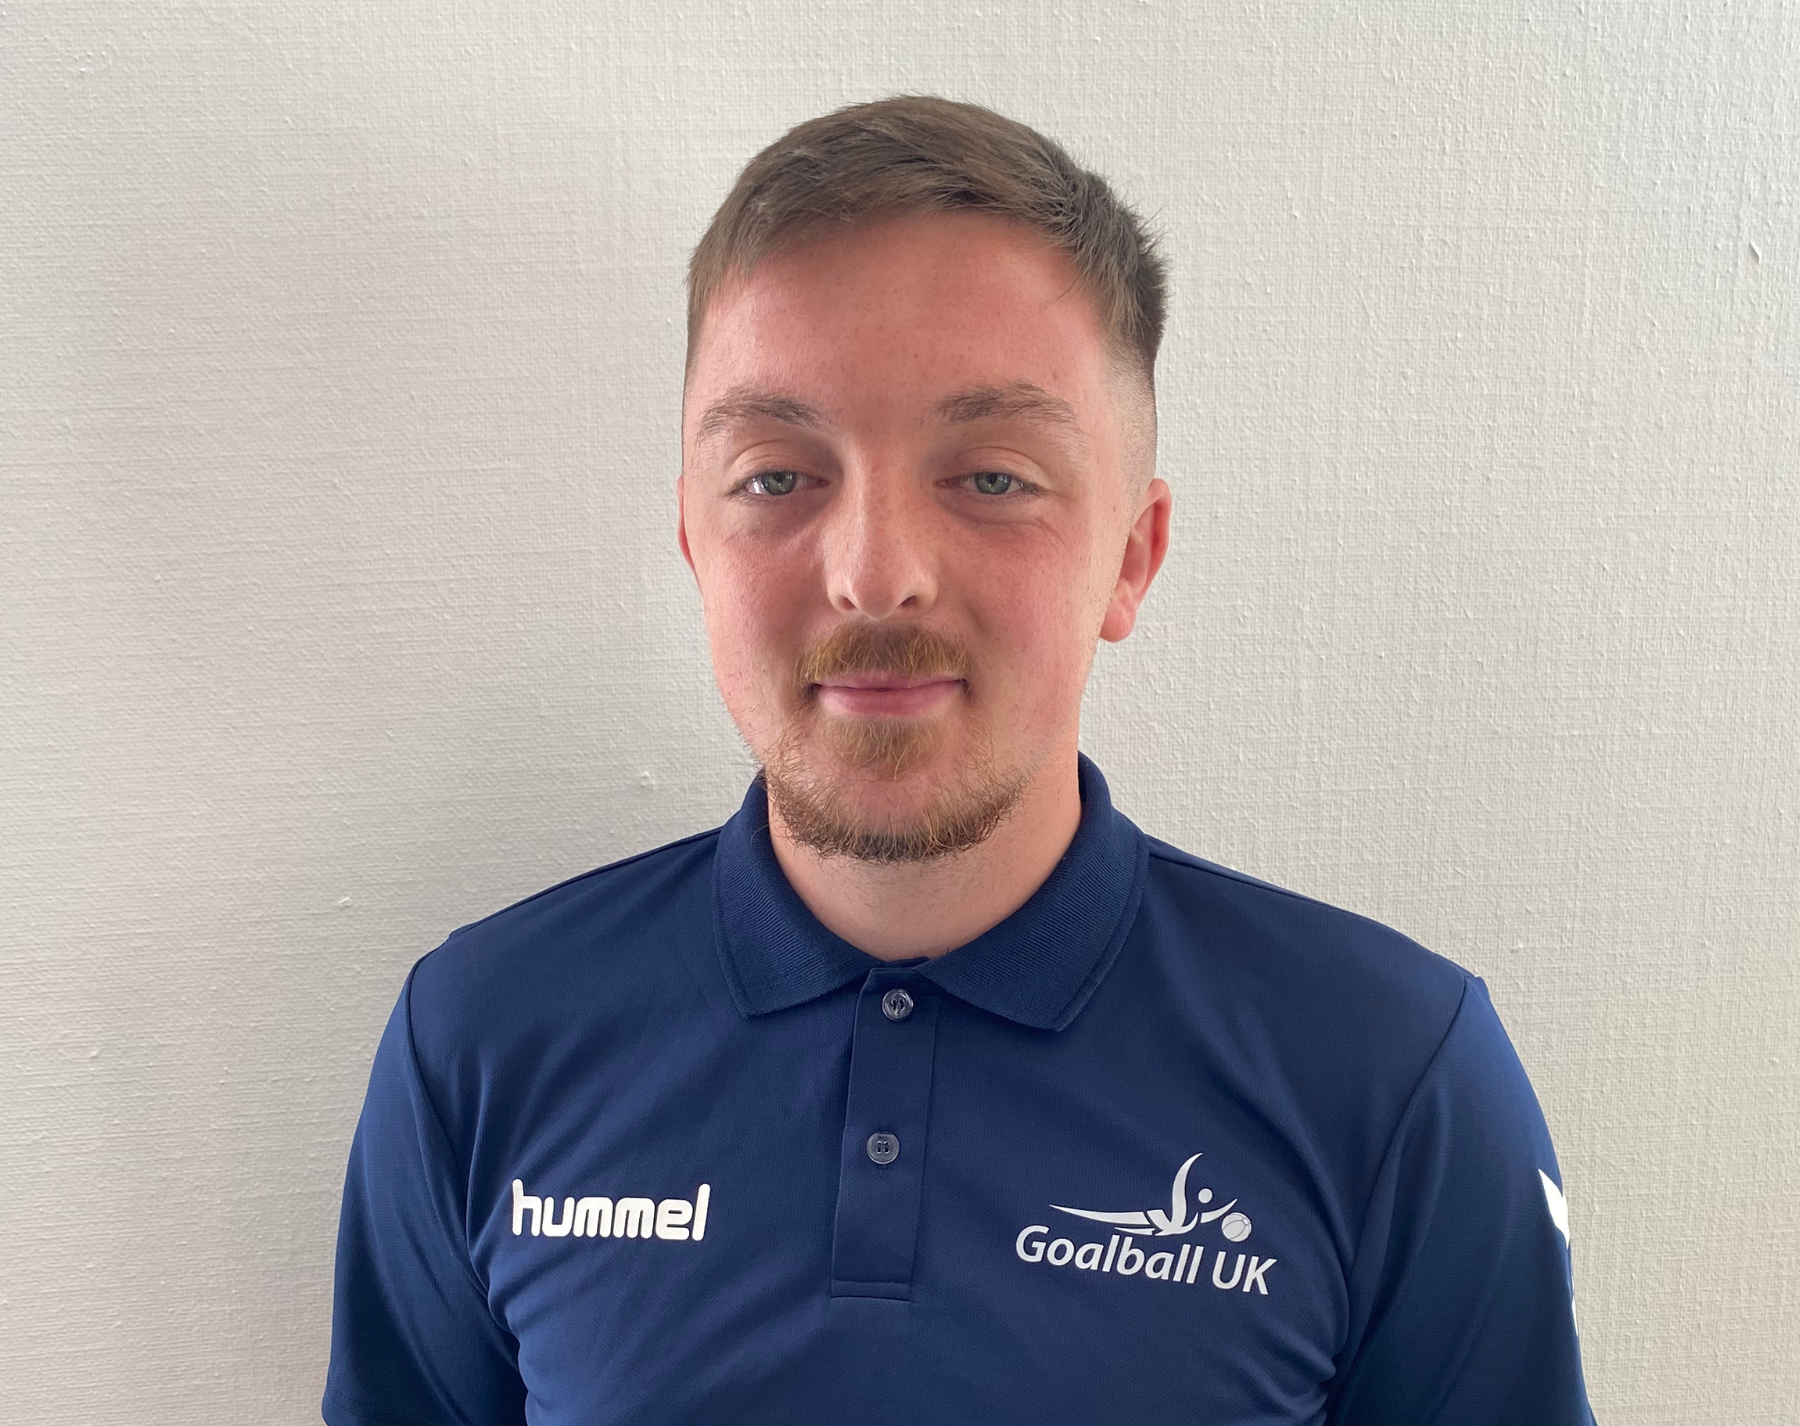 Alex Cockerham portrait. Alex is wearing a blue Goalball UK t-shirt and is stood in front of a white wall